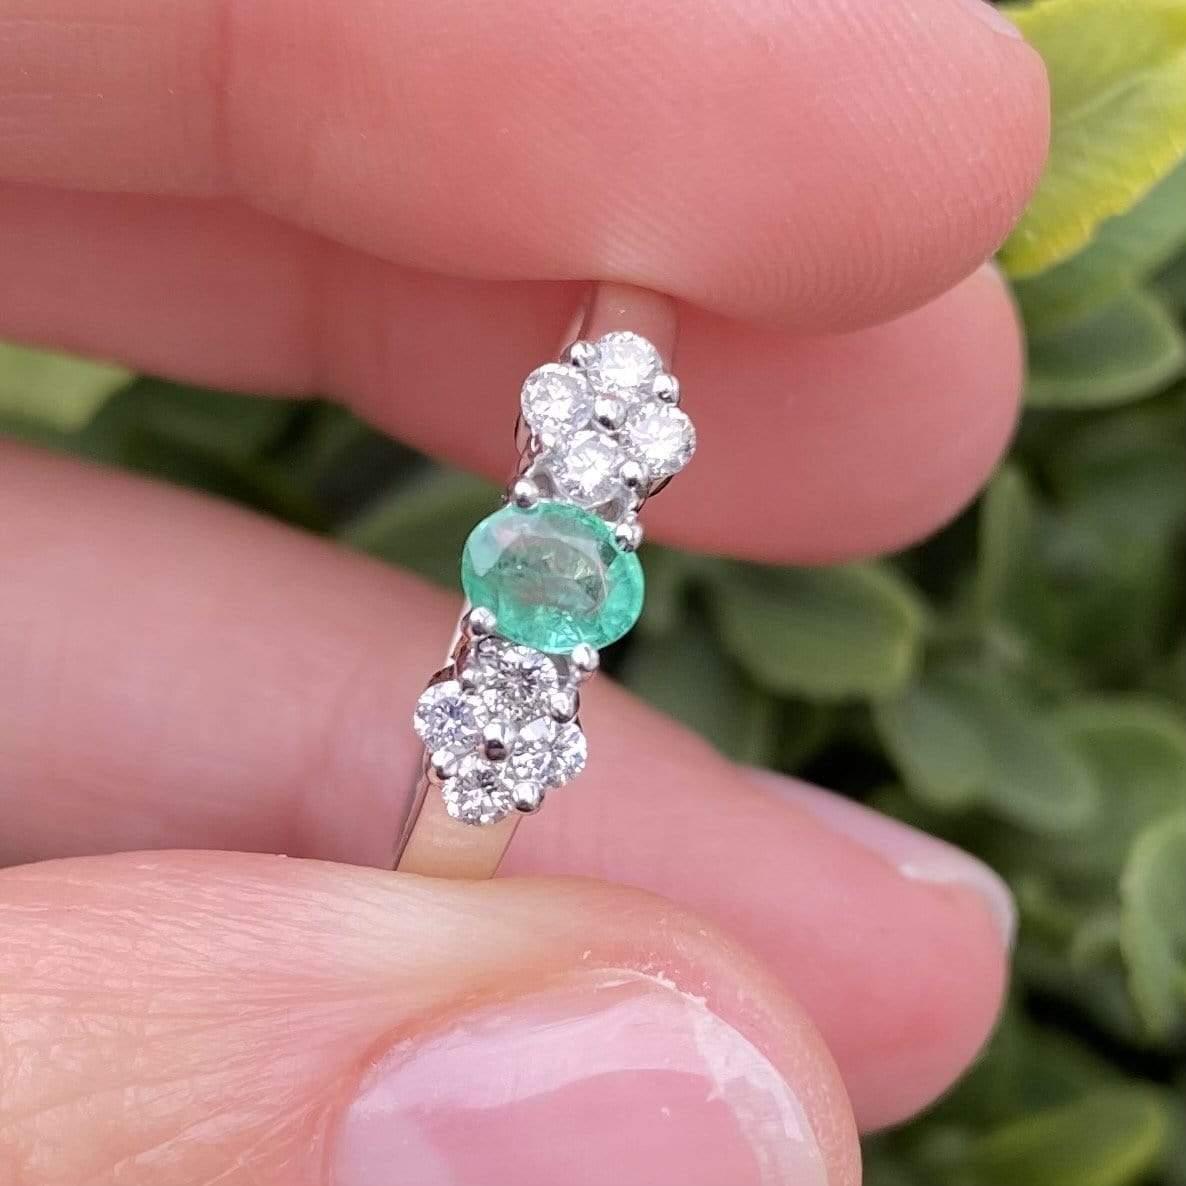 Emerald mines have been found to date back as far as Queen Cleopatra. Emerald symbolism encompasses not only royalty but also wit, eloquence, and foresight. “The Jewel of Kings” also serves as the May birthstone. Whatever its supposed mystical